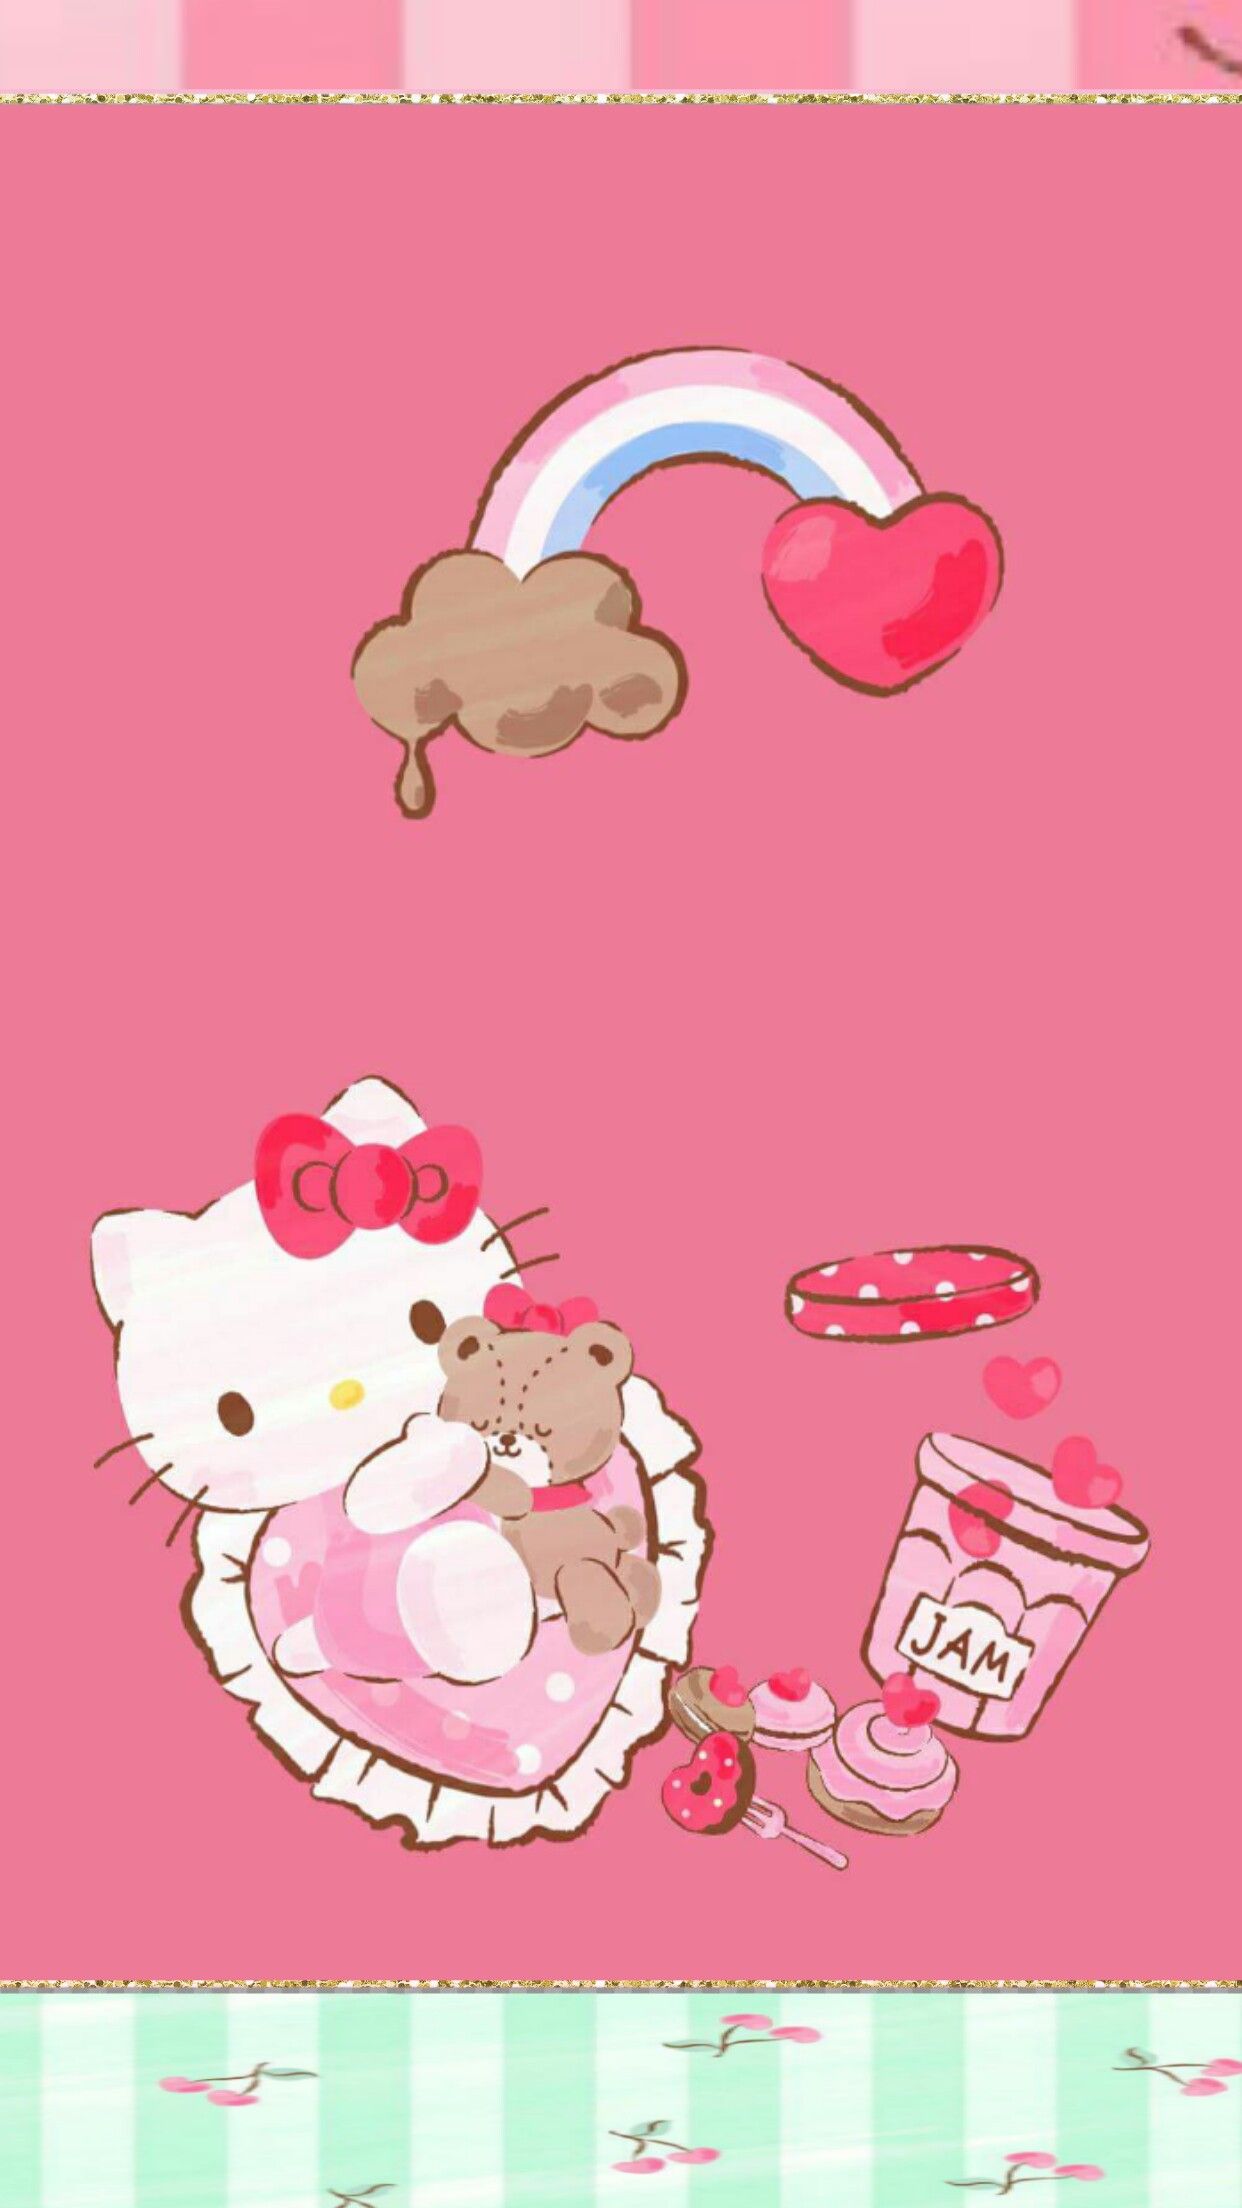 Iphone wall valentines day tjn hello kitty pictures hello kitty wallpaper hello kitty wallpaper free